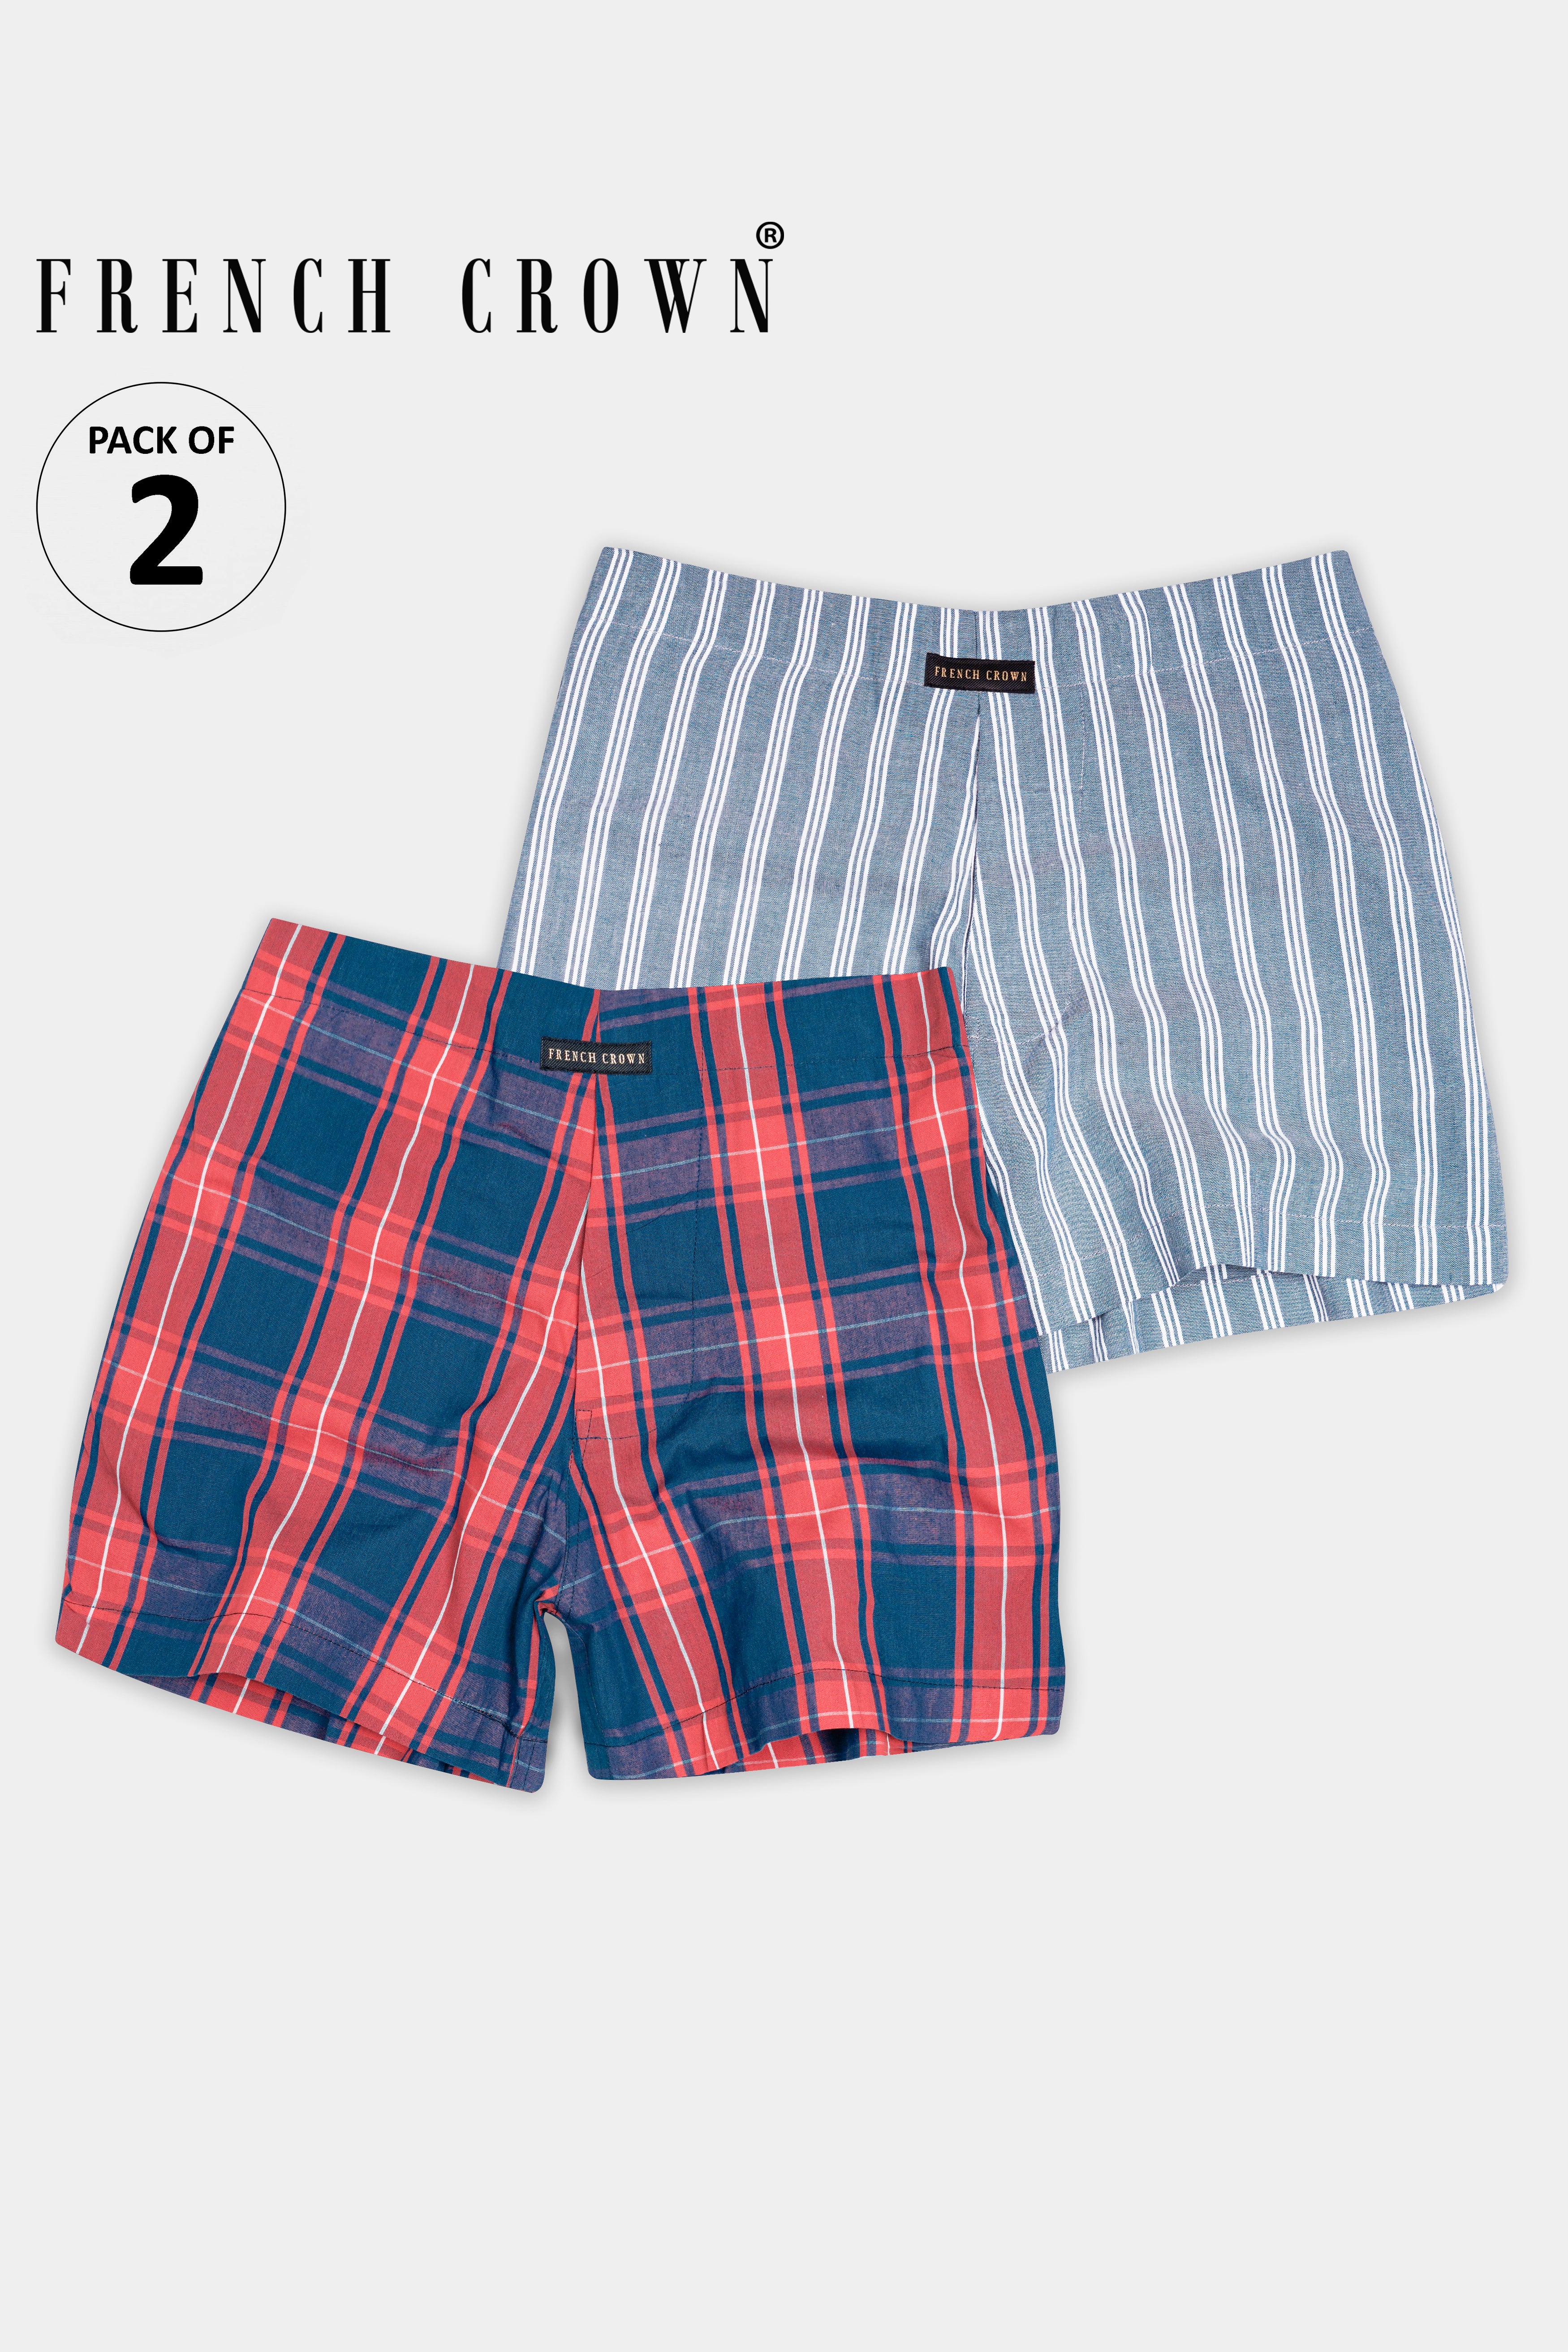 Cadet Blue With White Striped Royal Oxford and Chathams Blue with Airbnb Red Checkered Premium Cotton Boxers BX516-BX551-28, BX516-BX551-30, BX516-BX551-32, BX516-BX551-34, BX516-BX551-36, BX516-BX551-38, BX516-BX551-40, BX516-BX551-42, BX516-BX551-44